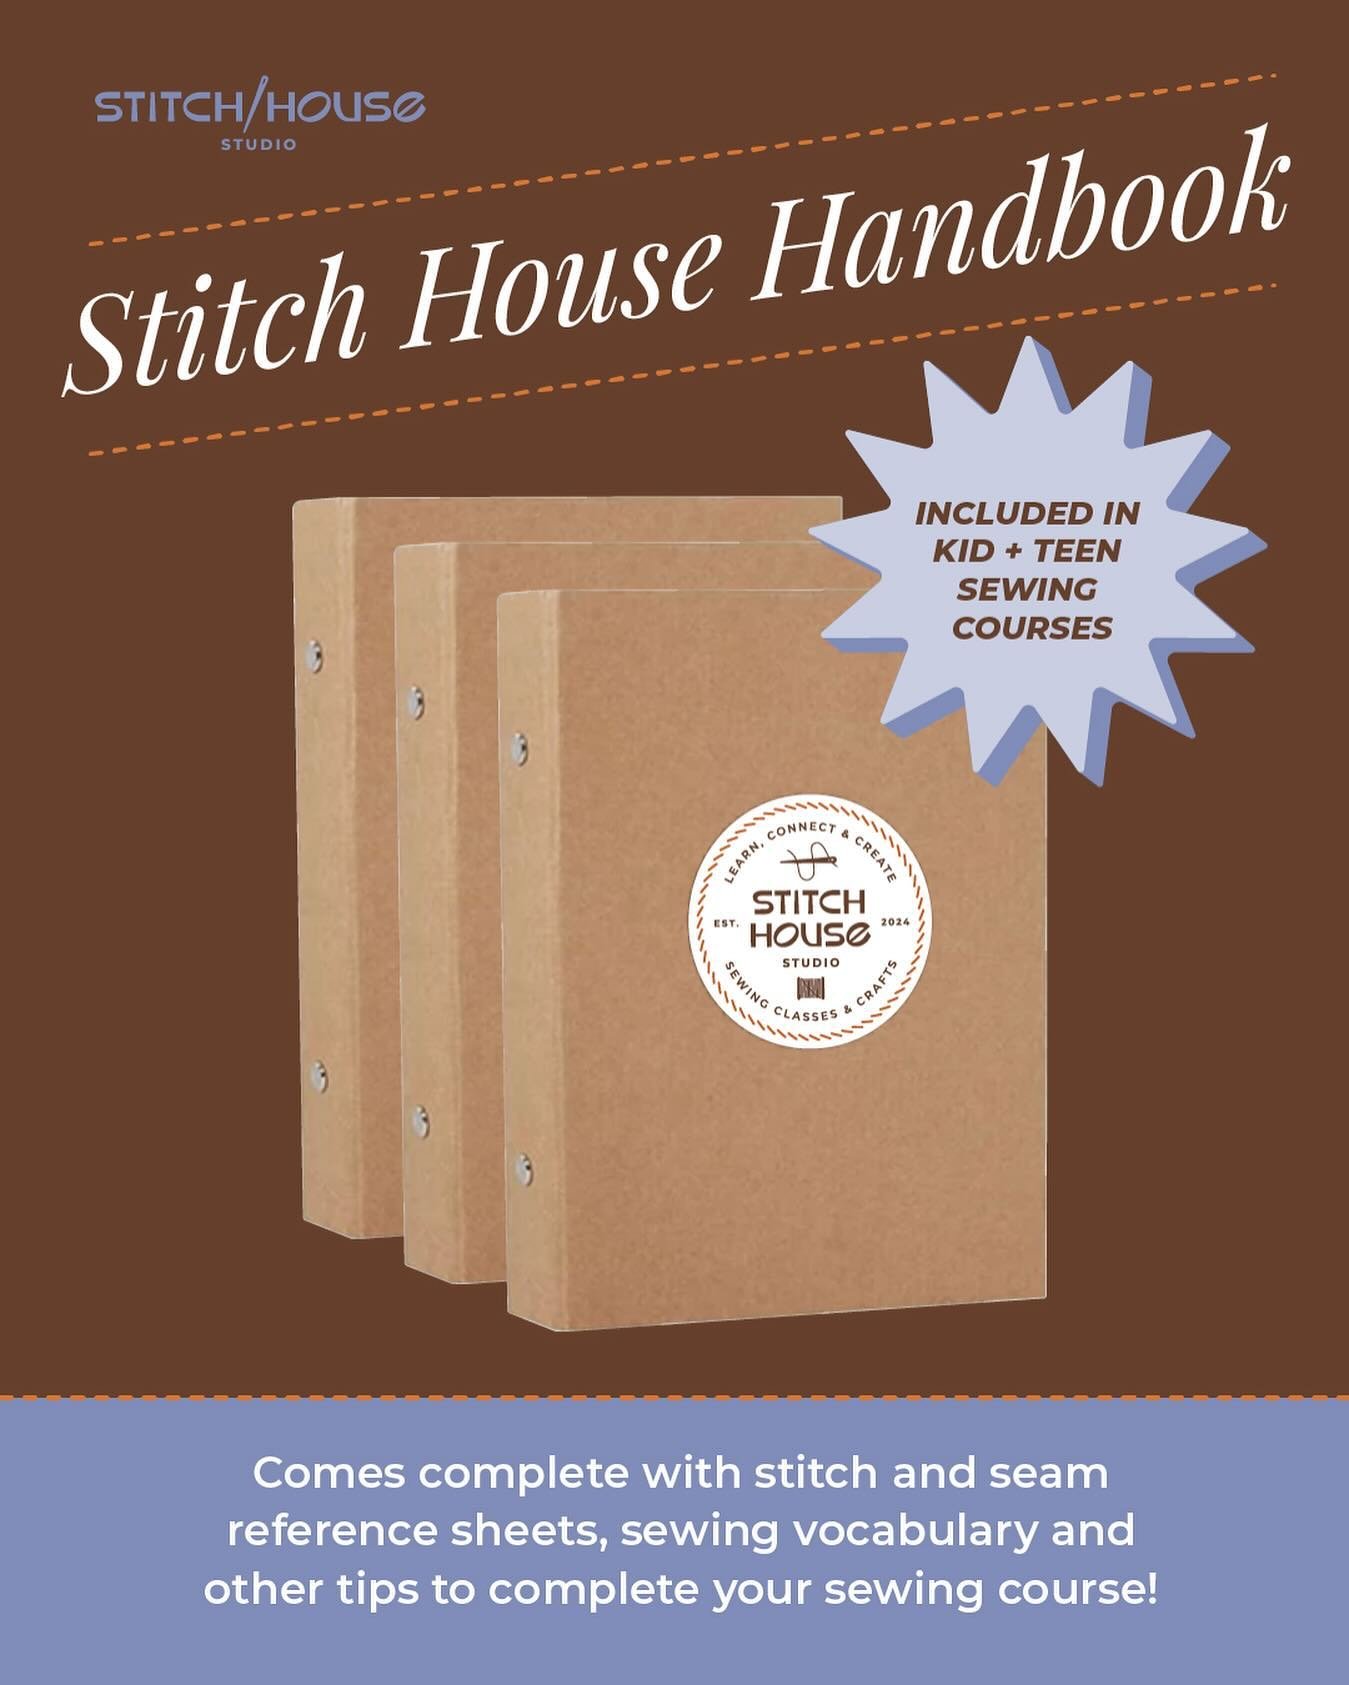 Each Kids and Teens Sewing Course comes with one of our Stitch House Handbooks! We designed these as useful references for students to use throughout their course and beyond. 

Our Summer Courses are perfect for kids and teens that want to learn to s